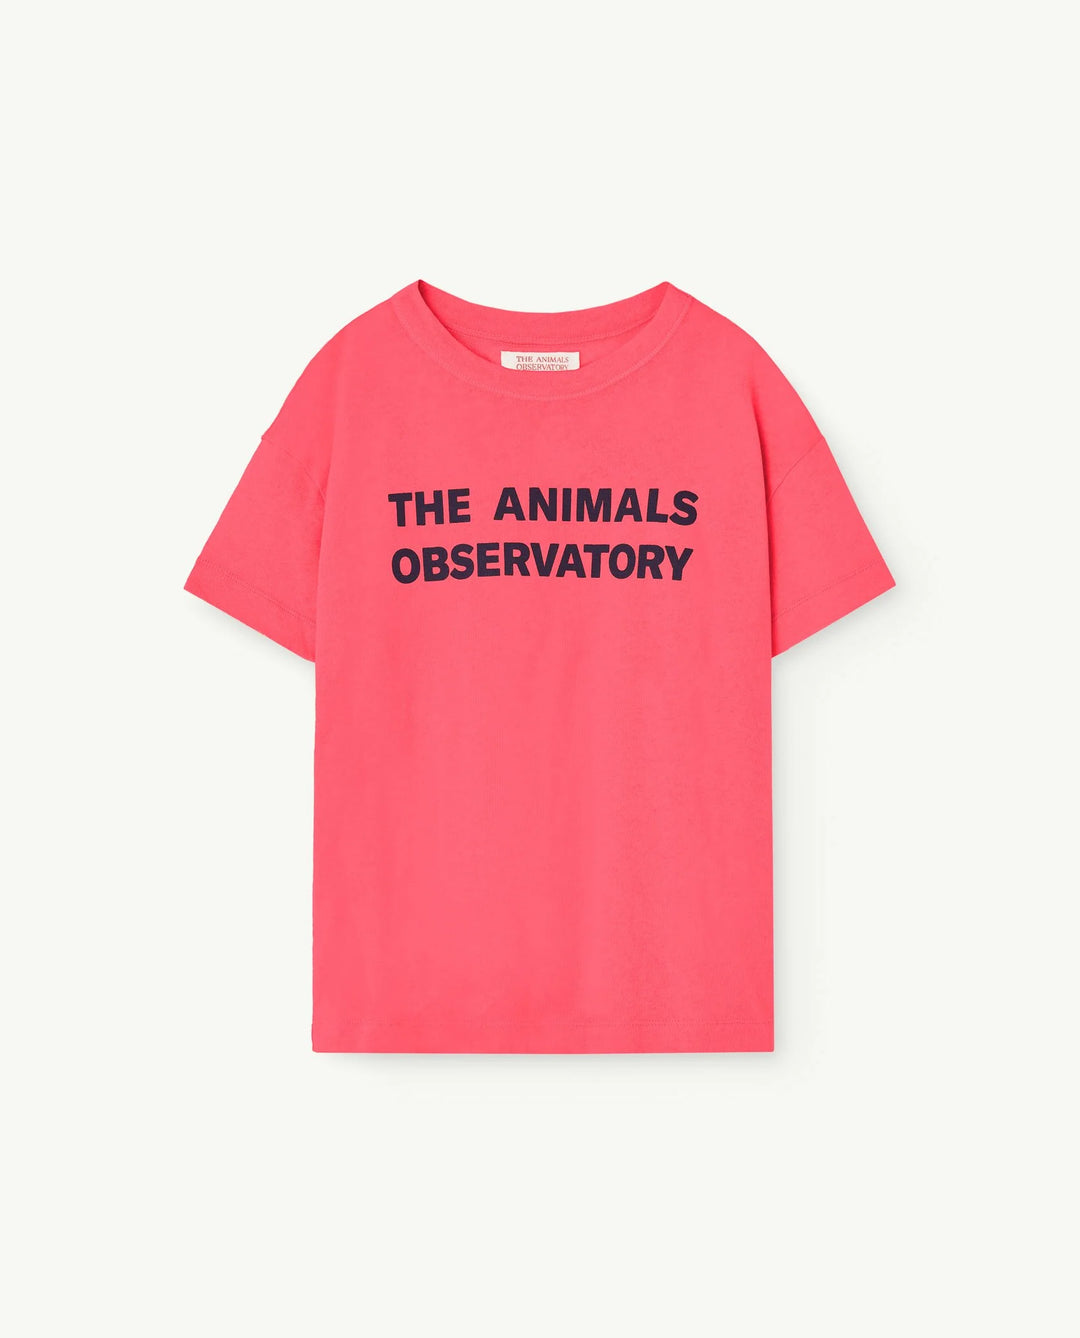 THE ANIMALS OBSERVATORY Kids Pink Orion T-Shirt